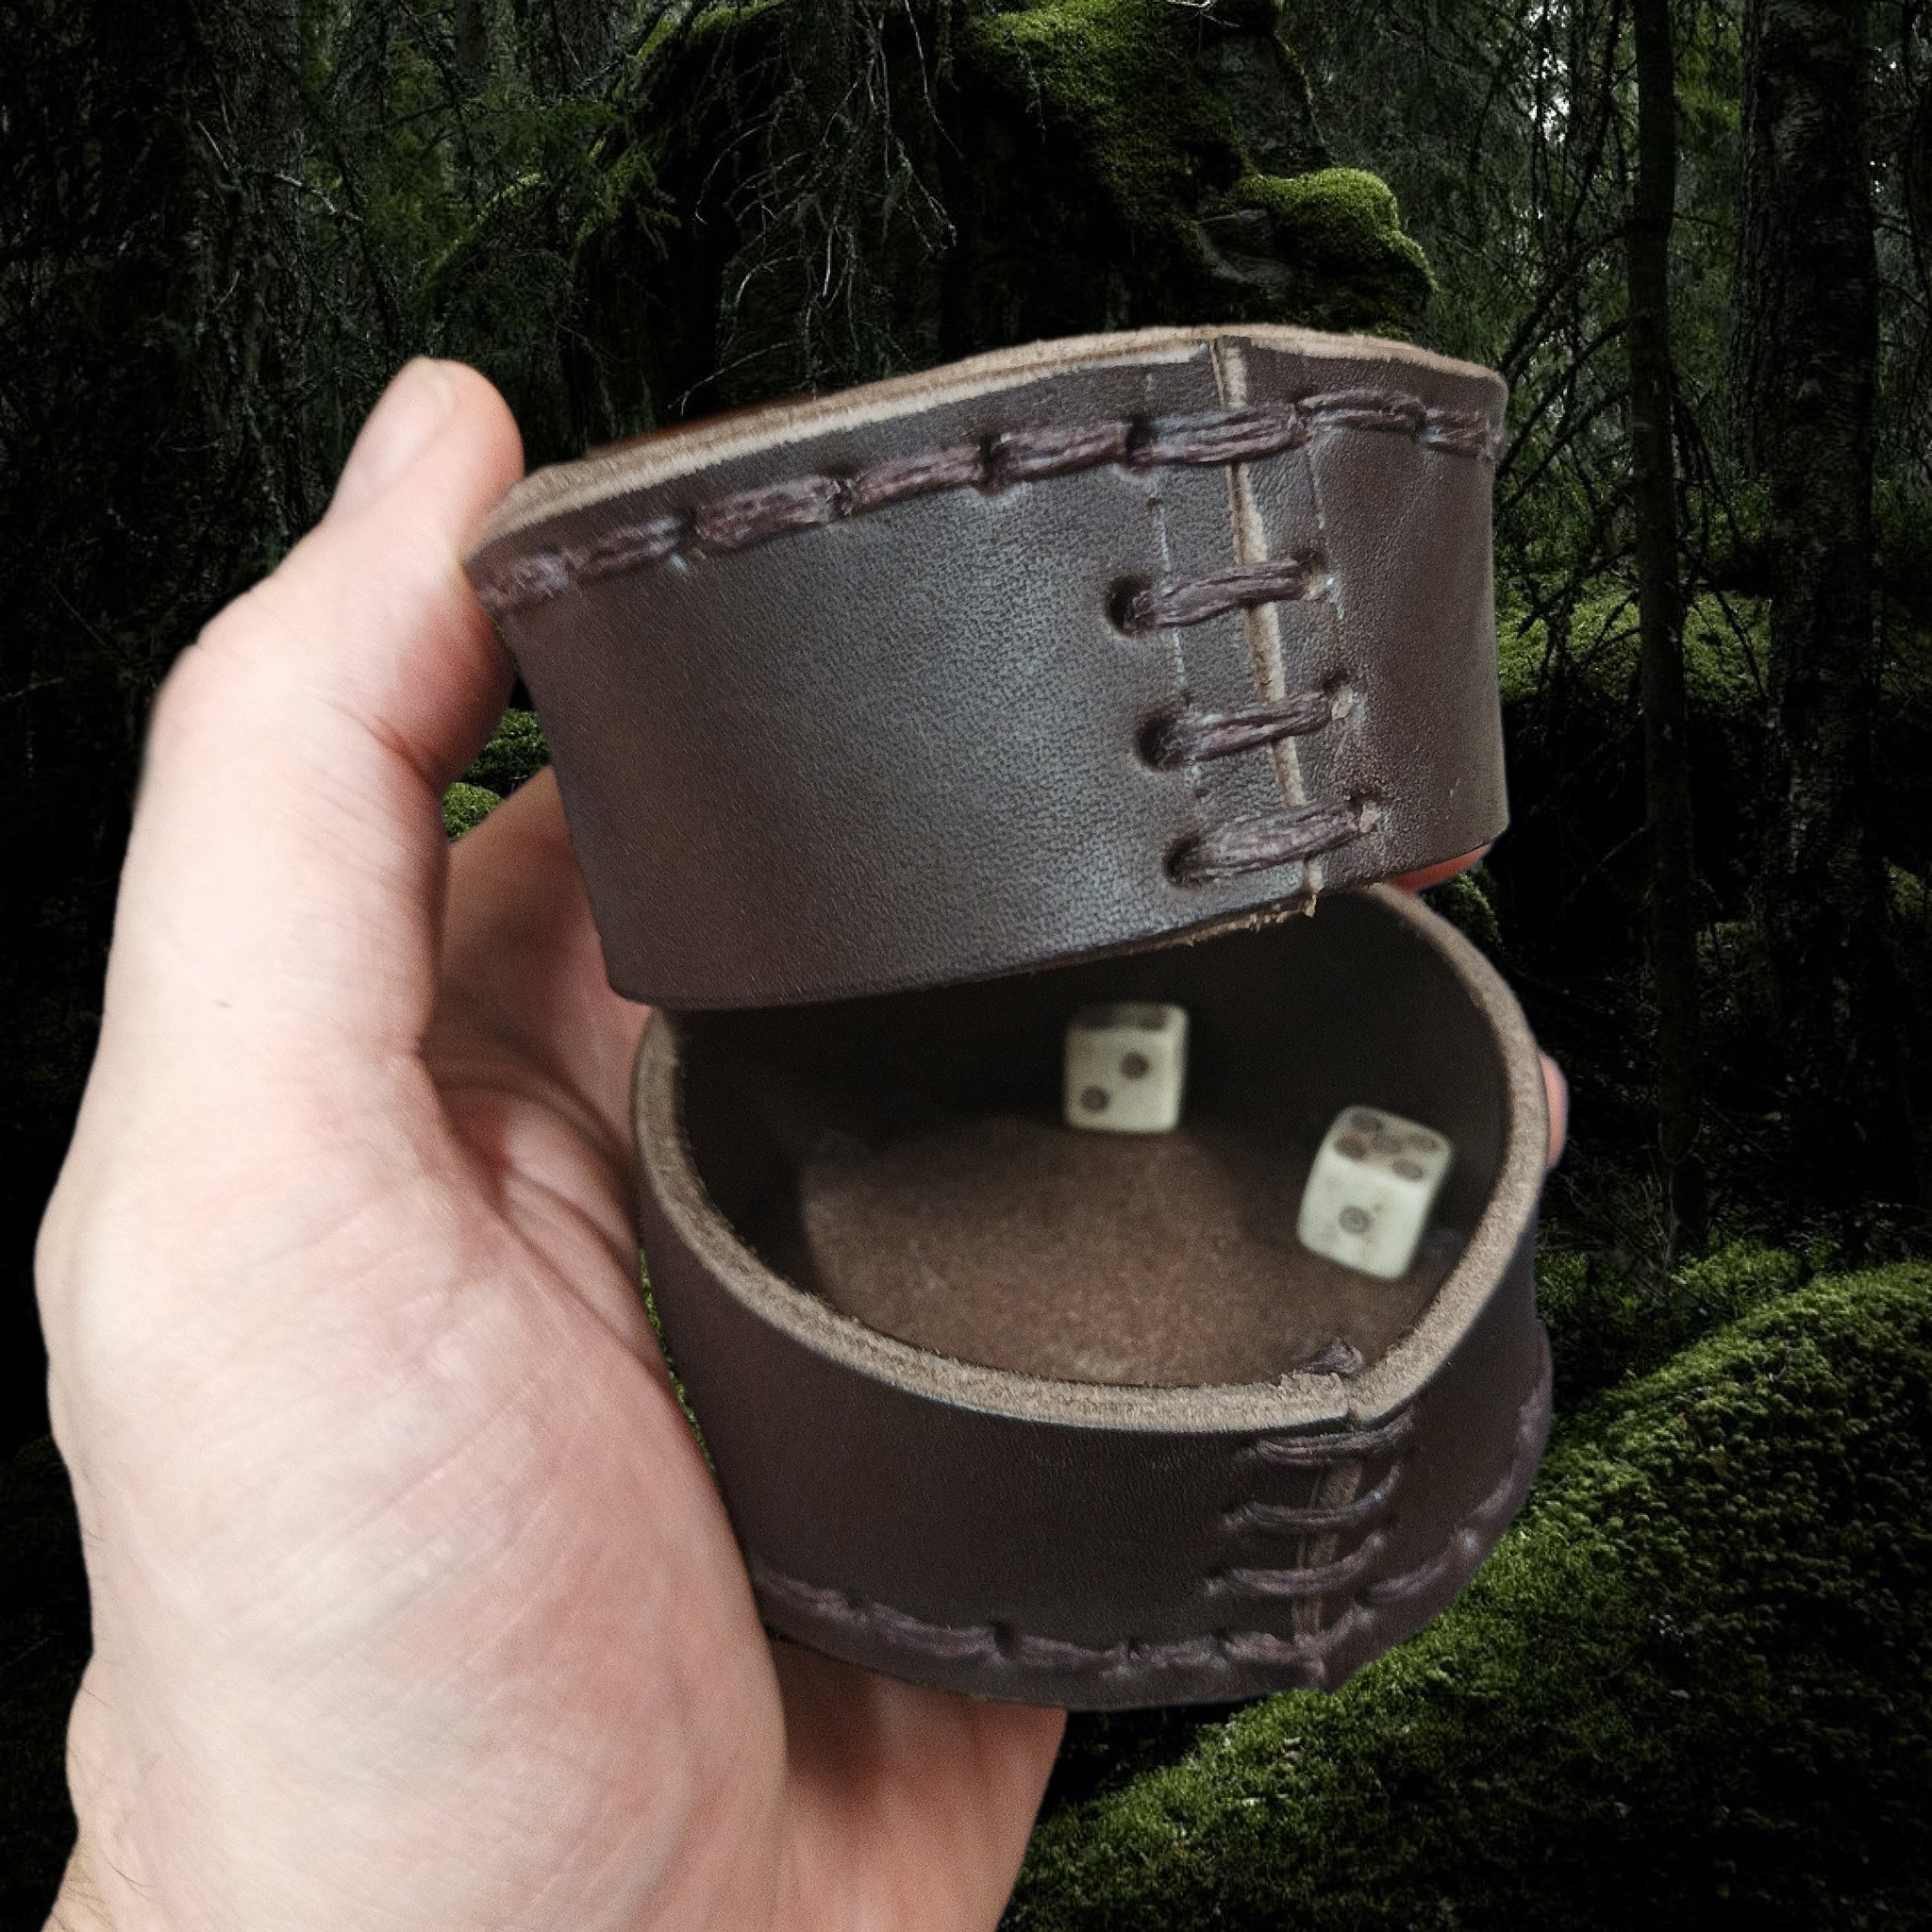 Handmade Leather Meier Dice Shaker with Dice in Hand